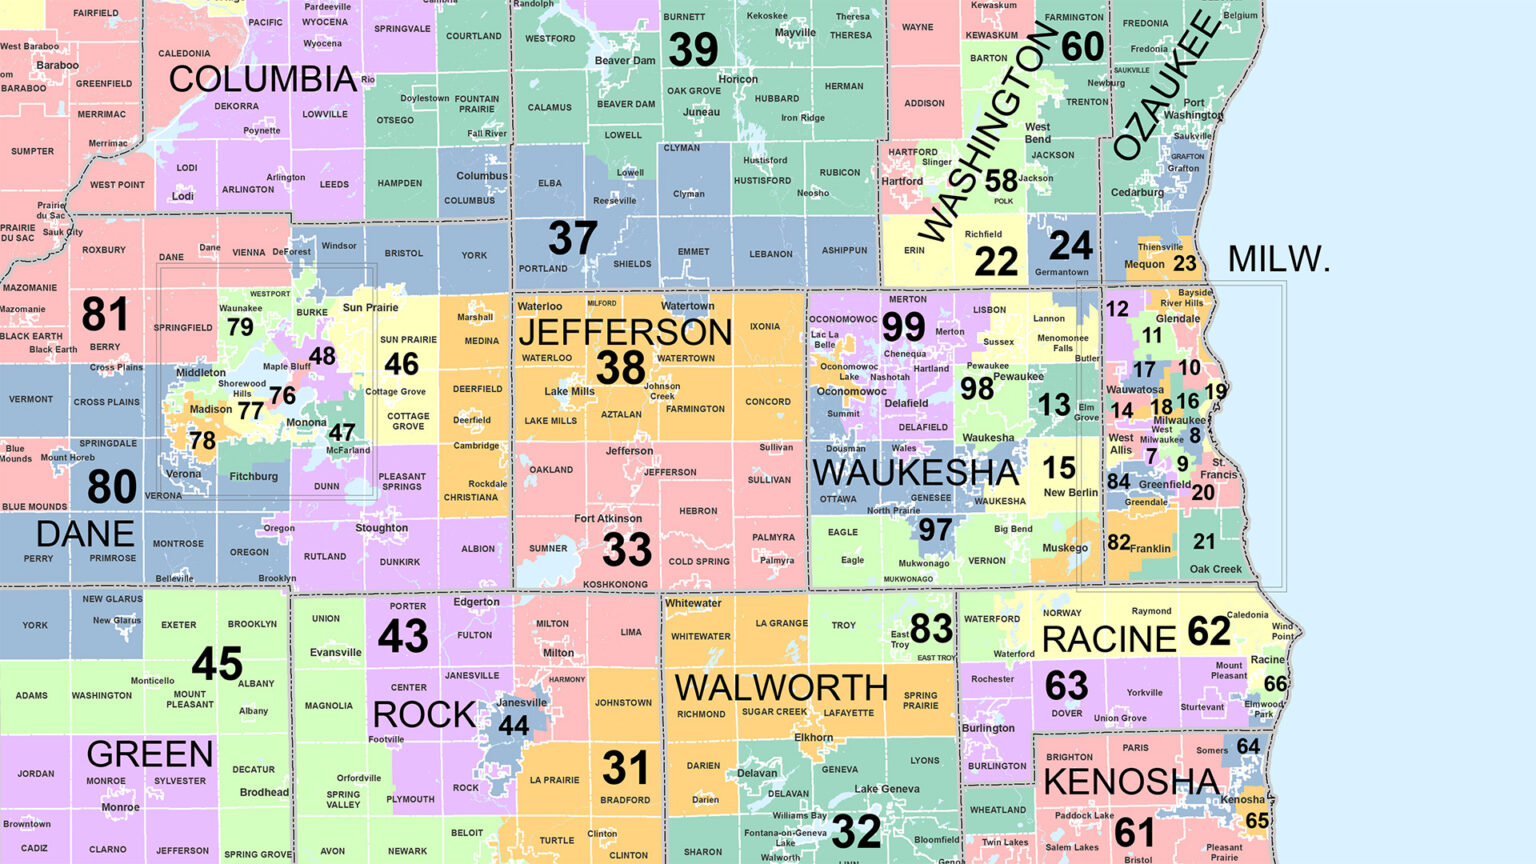 A portion of a map shows the outlines and municipalities included in Wisconsin Assembly districts in southern regions of the state.